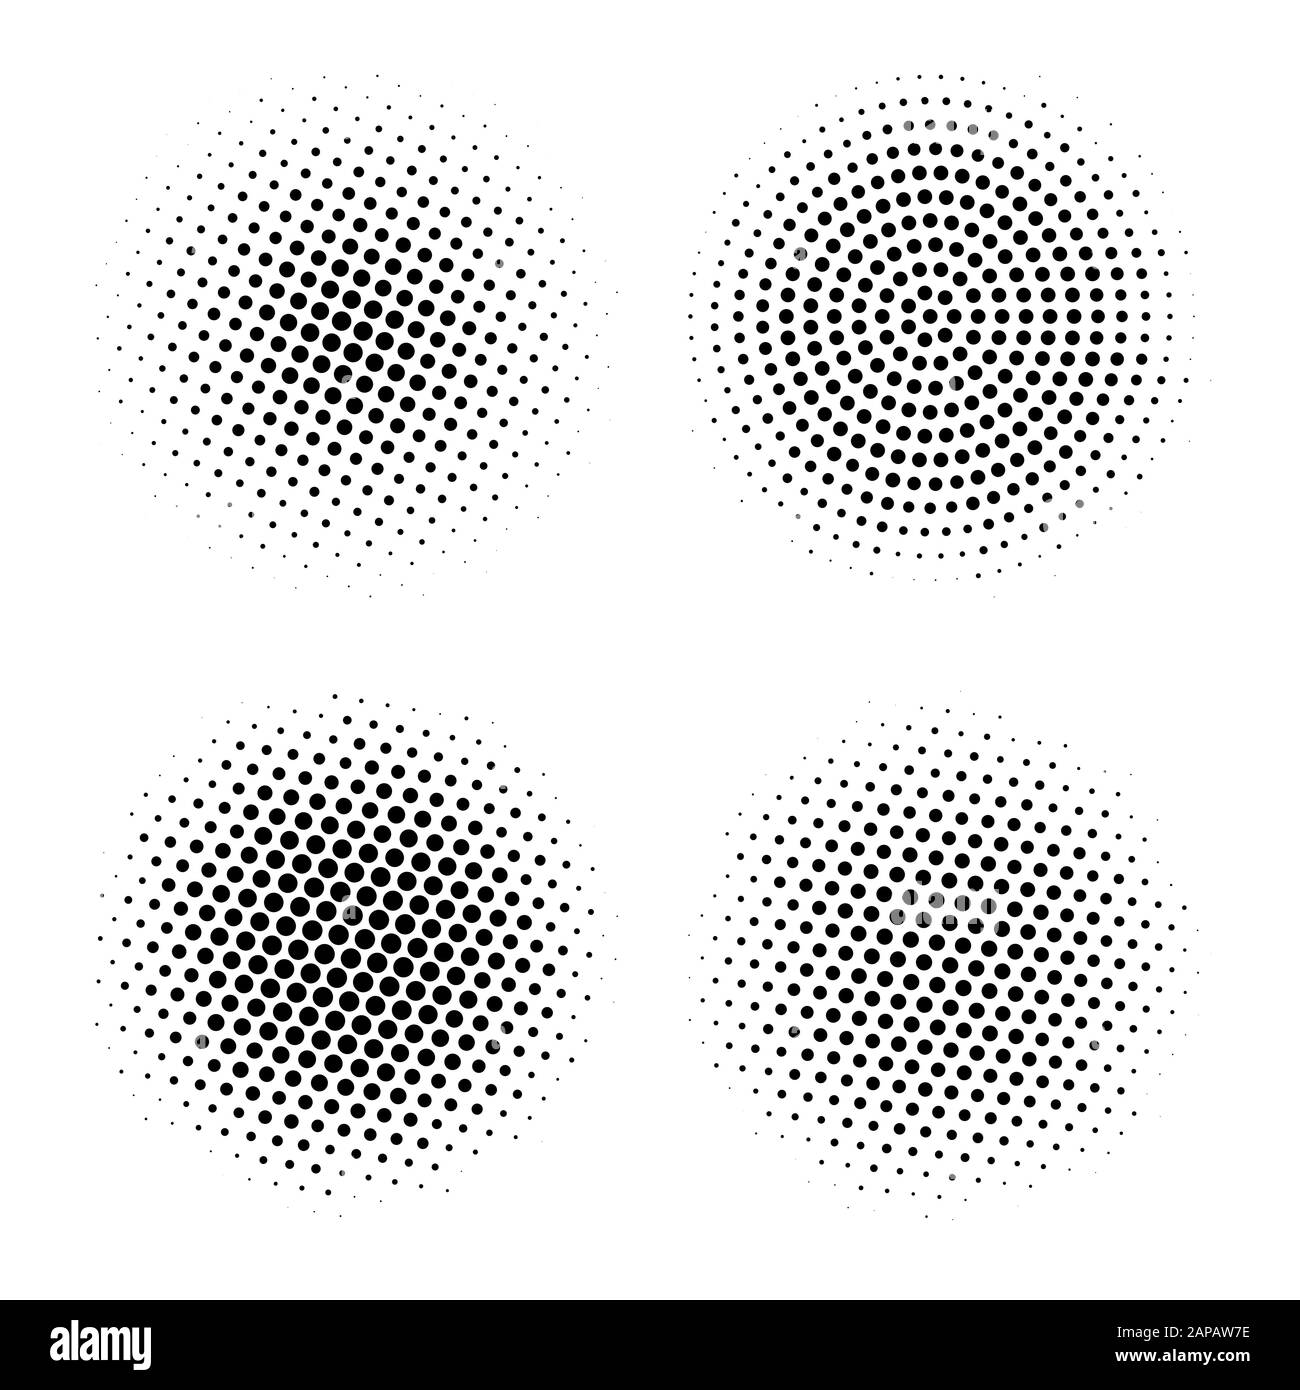 Halftone circles. Abstract vector dotted round patterns. Halftone explosion effect Stock Vector